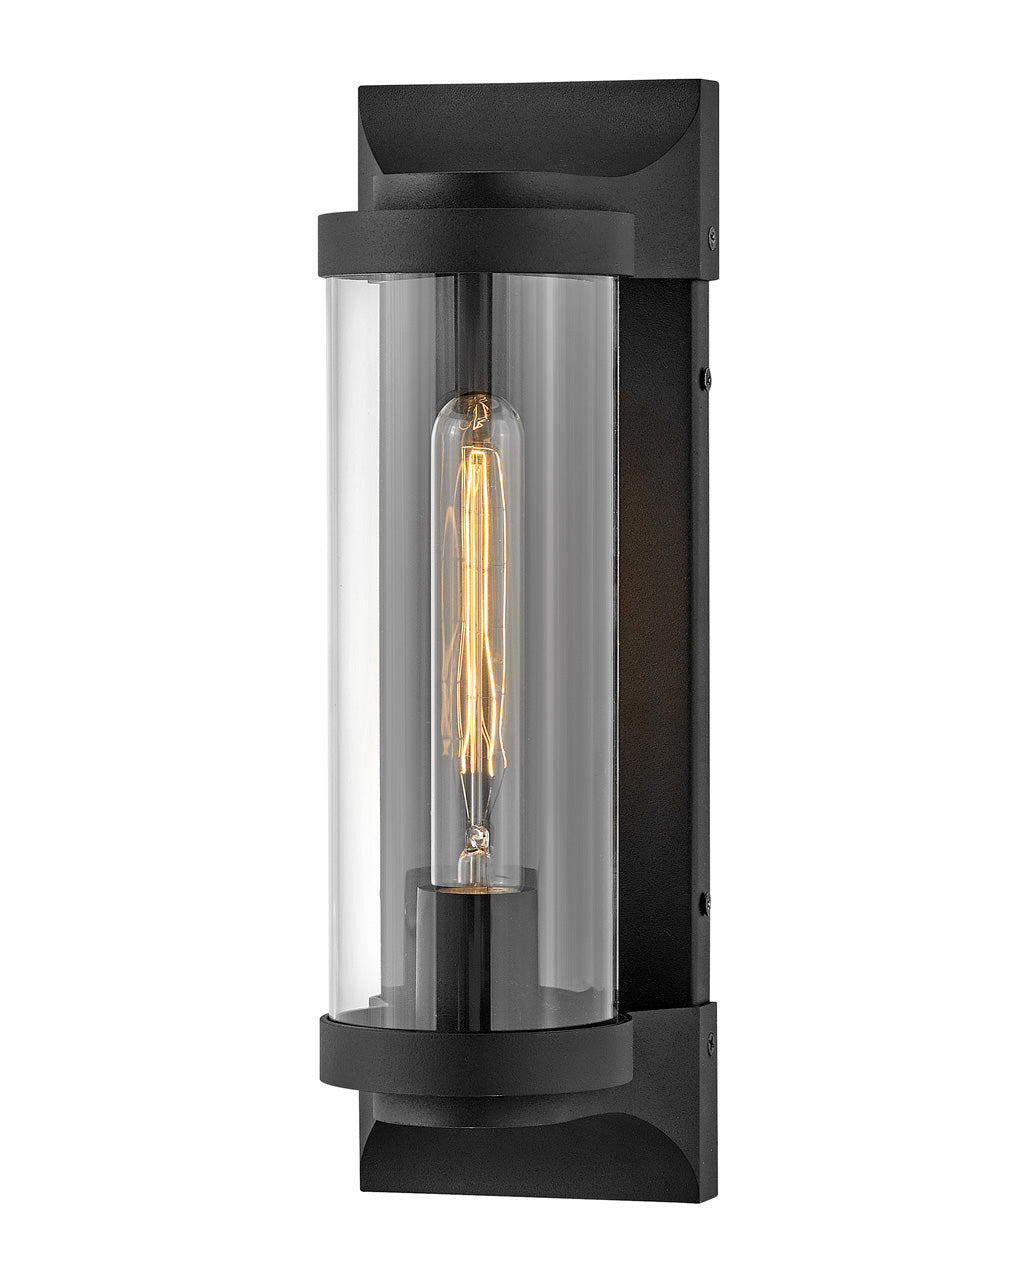 OUTDOOR PEARSON Wall Mount Lantern Outdoor l Wall Hinkley Textured Black 4.75x4.5x14.0 